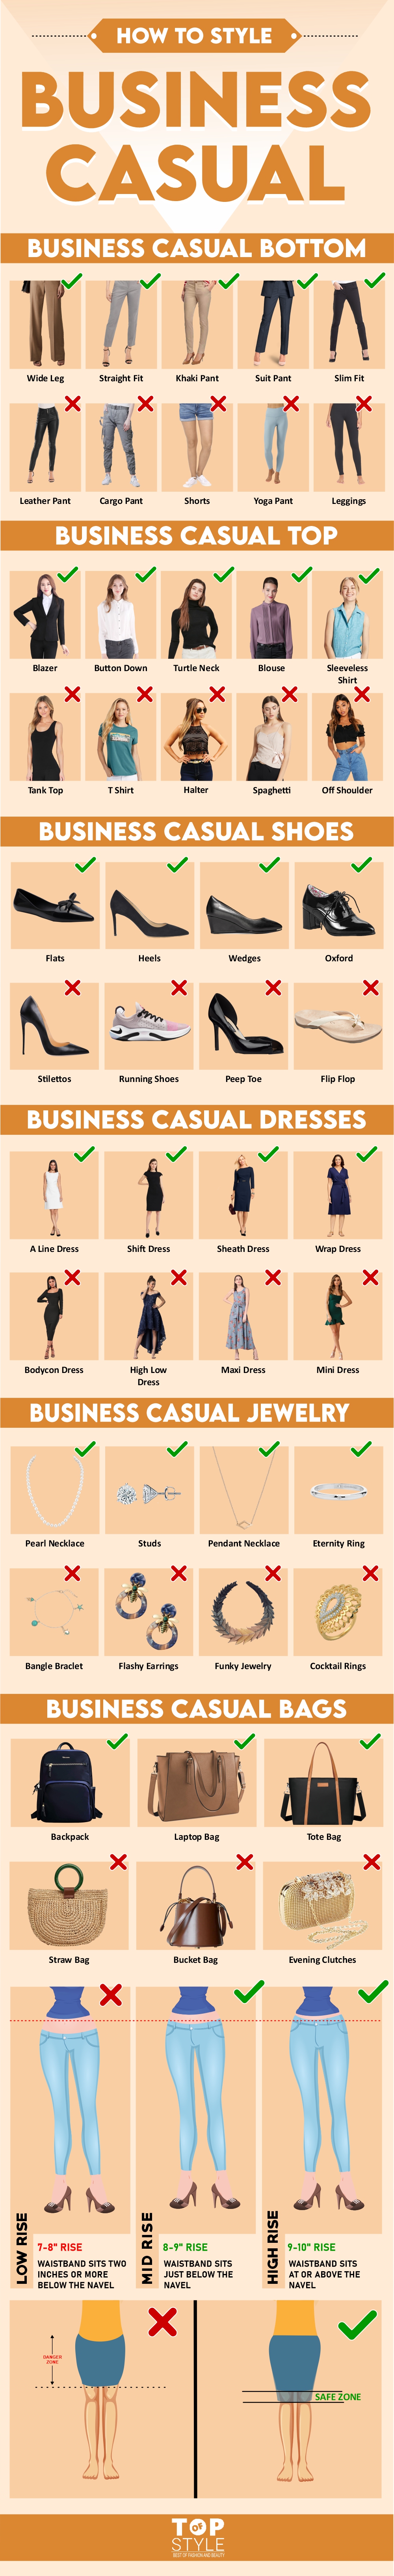 How to Style Business Casual Women Clothes - TopOfStyle Blog